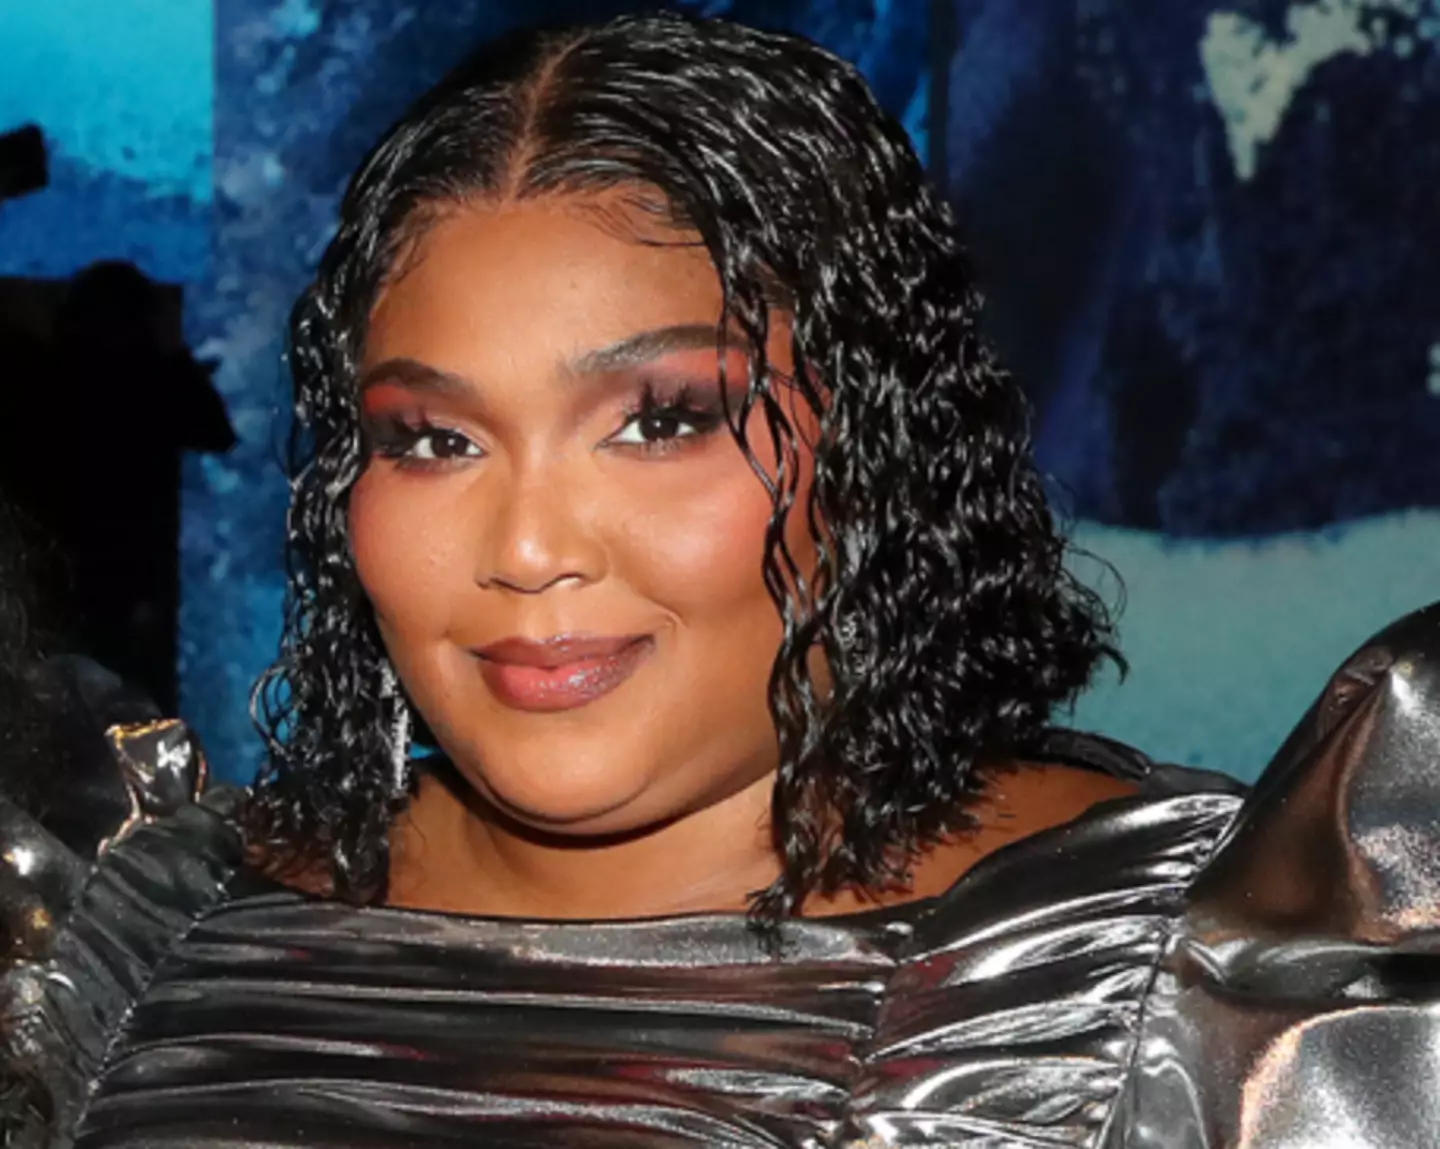 Lizzo has lost thousands of followers since the lawsuit was filed.